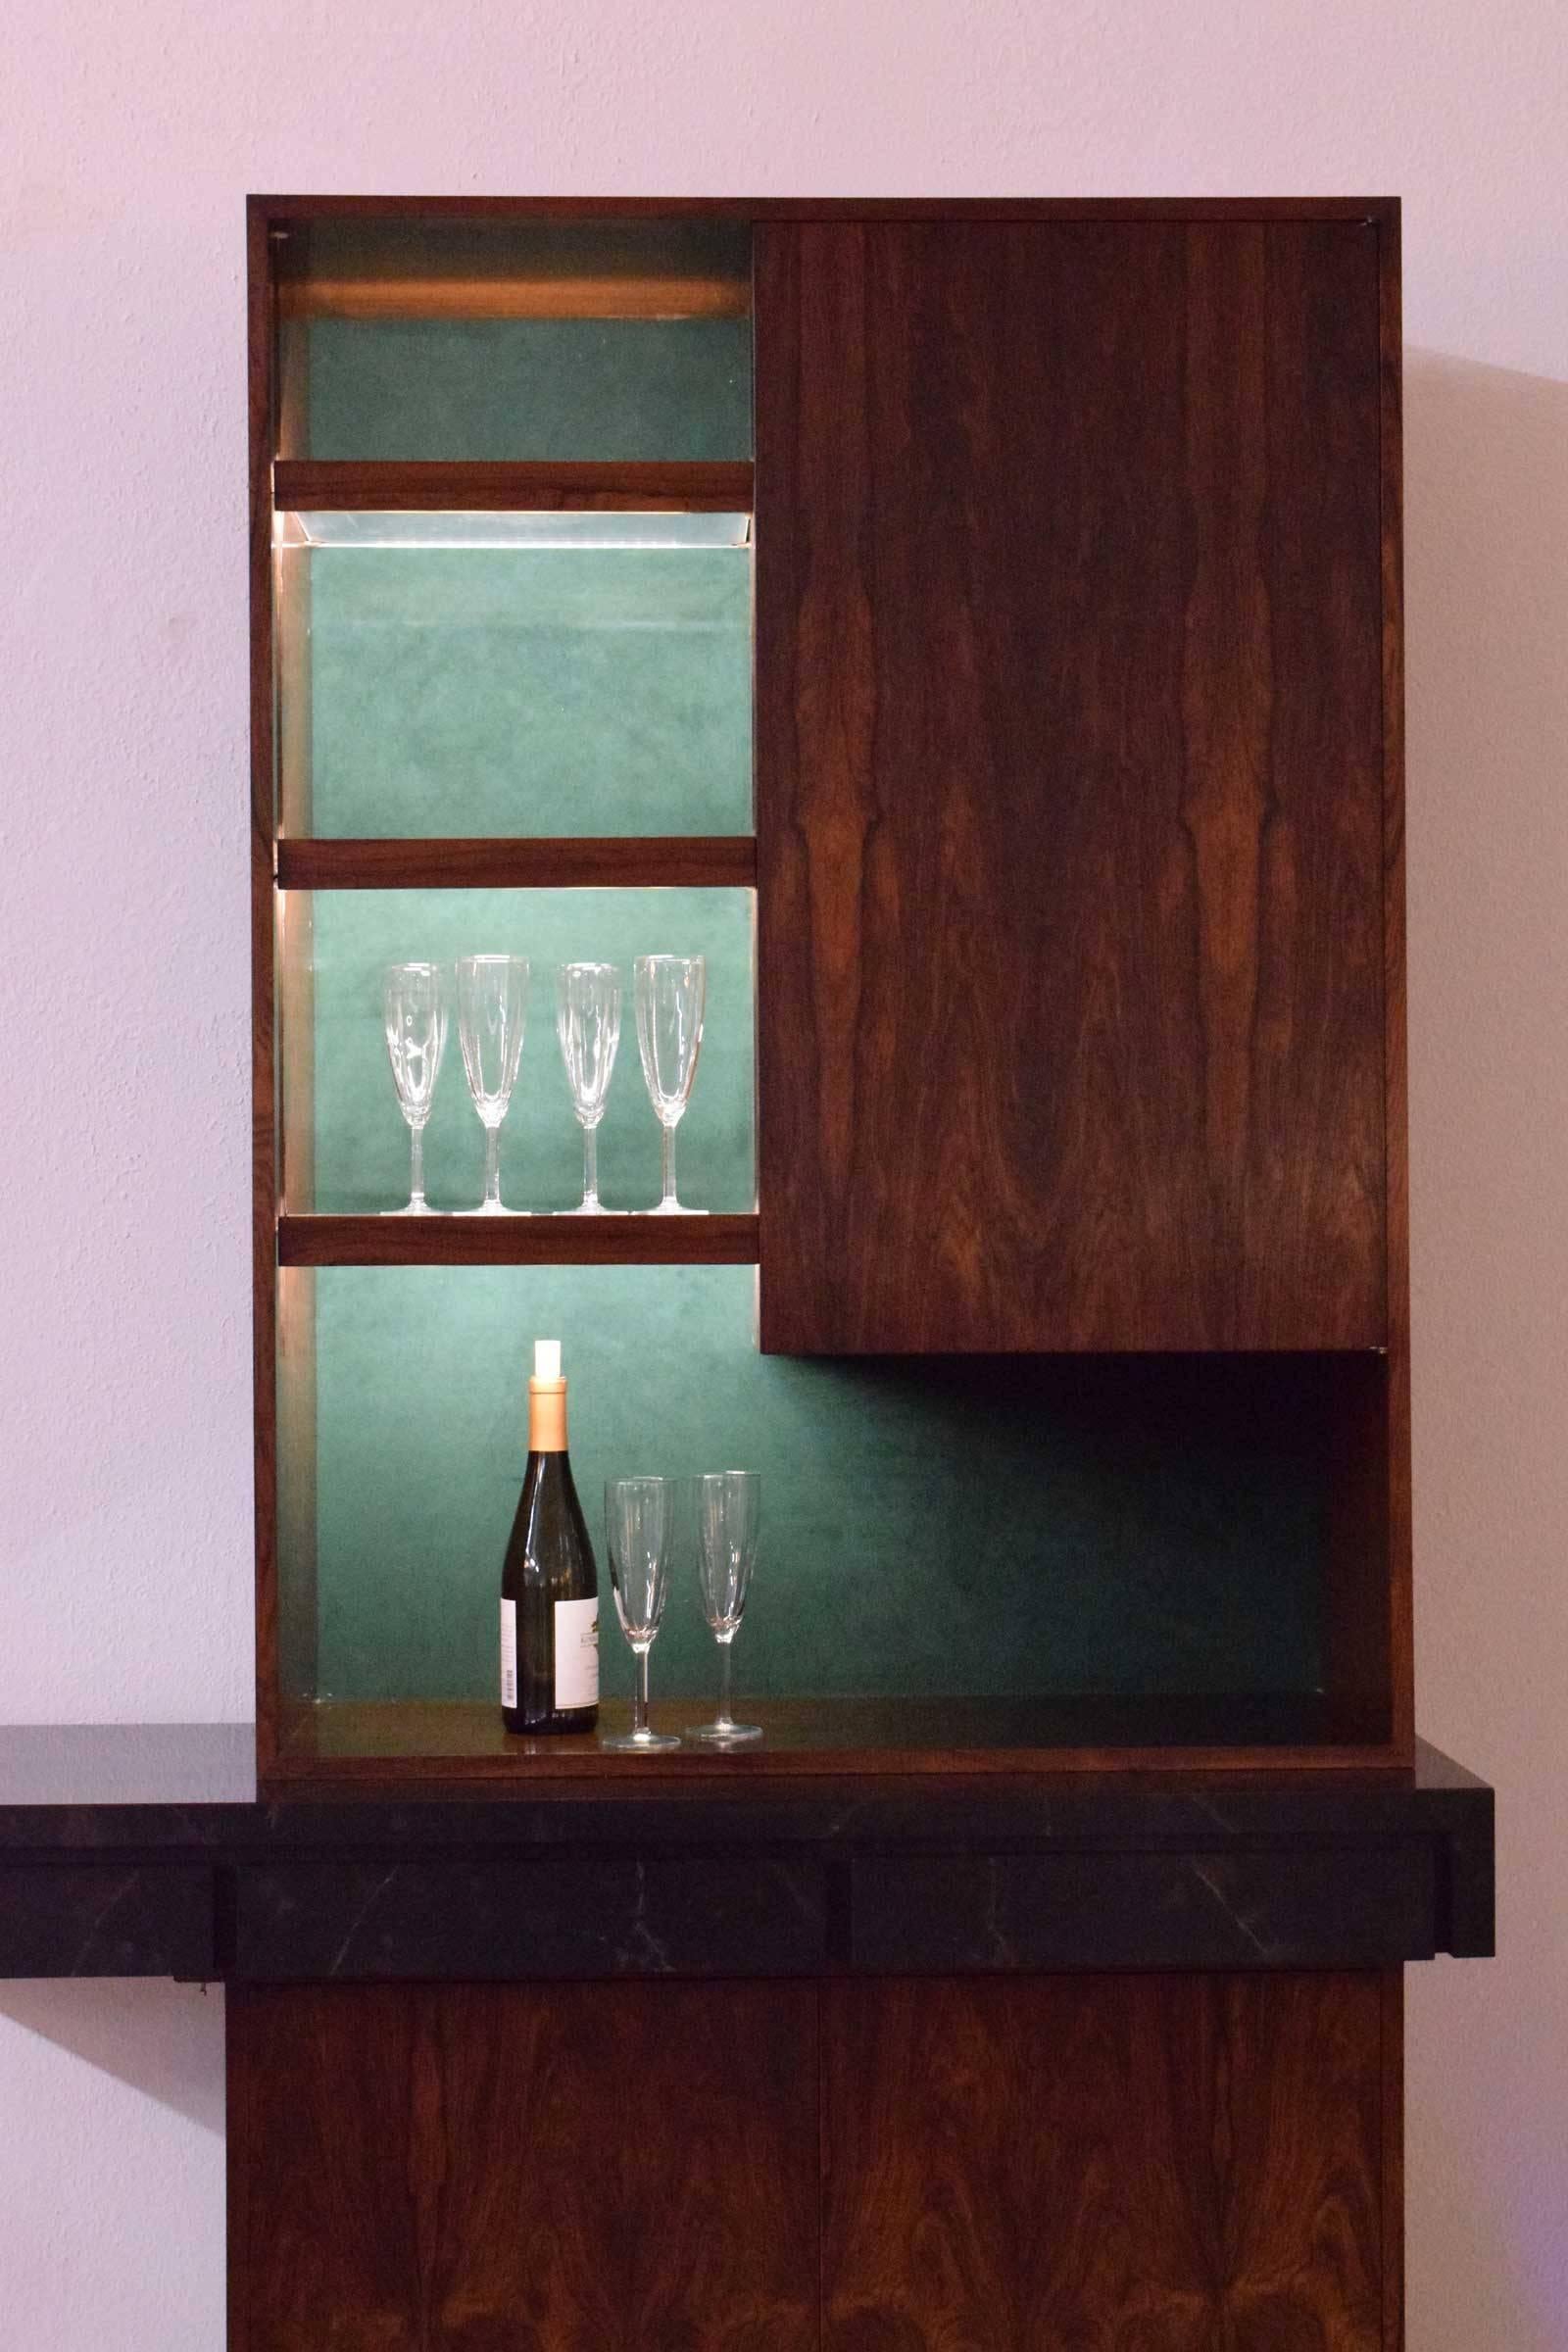 Beautiful rosewood veneer, faux marble top, felt lined drawers, lucite shelves with rosewood trim, lighting on top and bottom, wine storage.